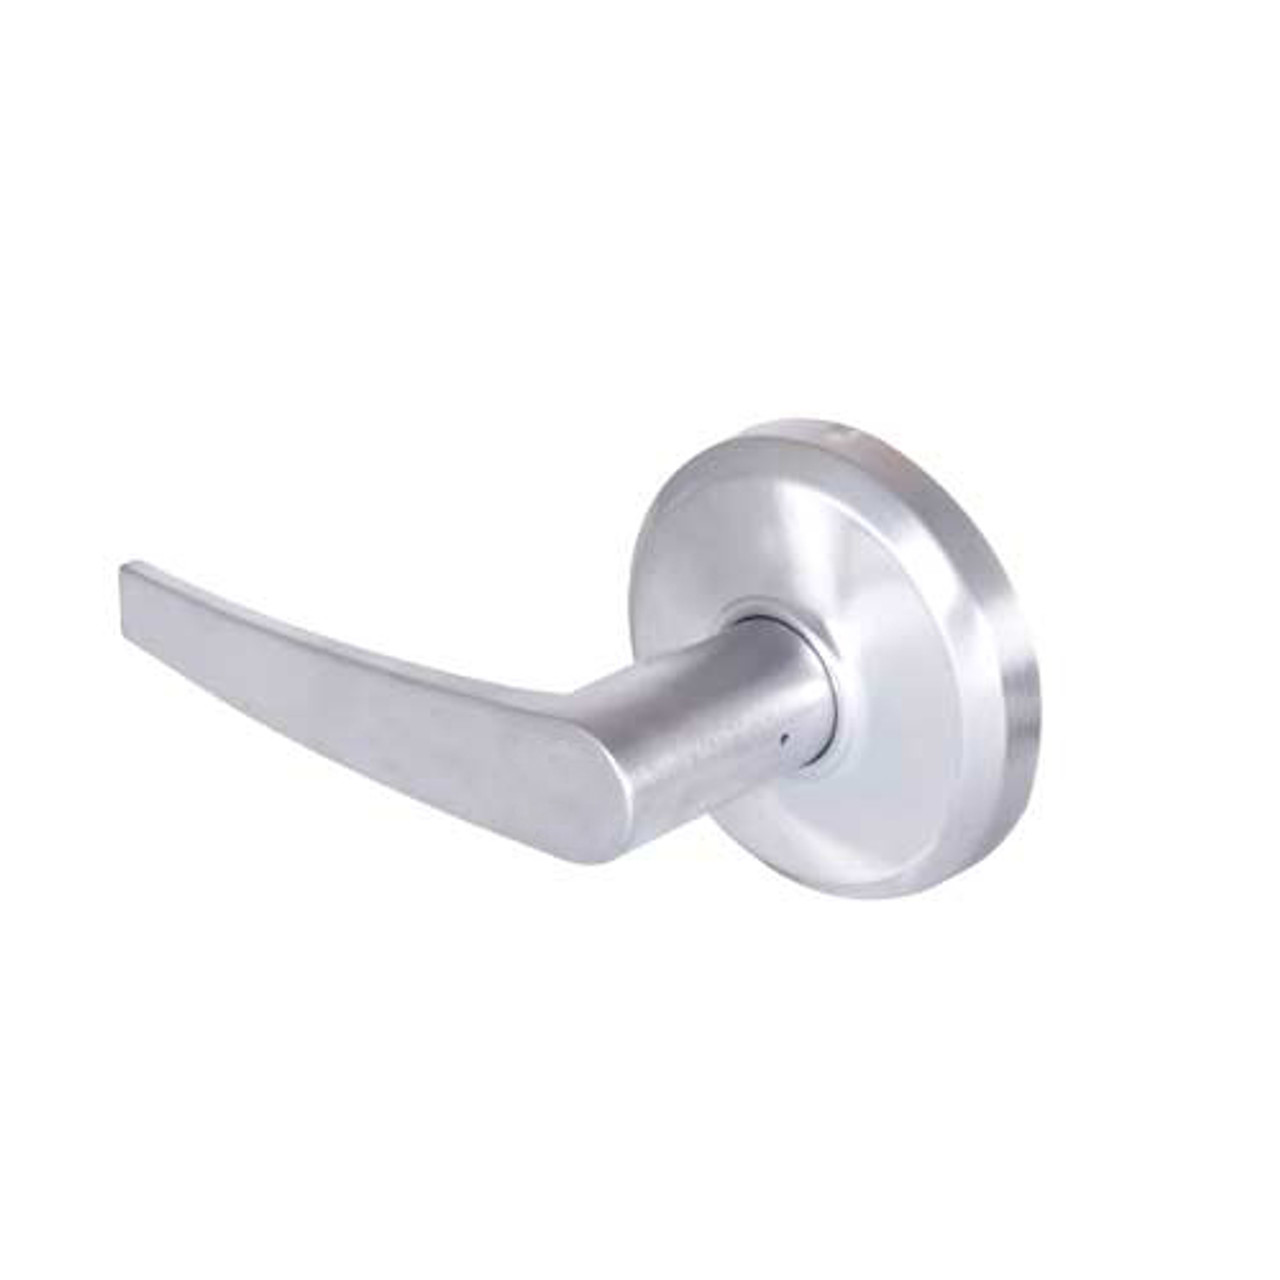 QCL235A625S3FLR Stanley QCL200 Series Cylindrical Communicating Lock with Slate Lever in Bright Chrome Finish